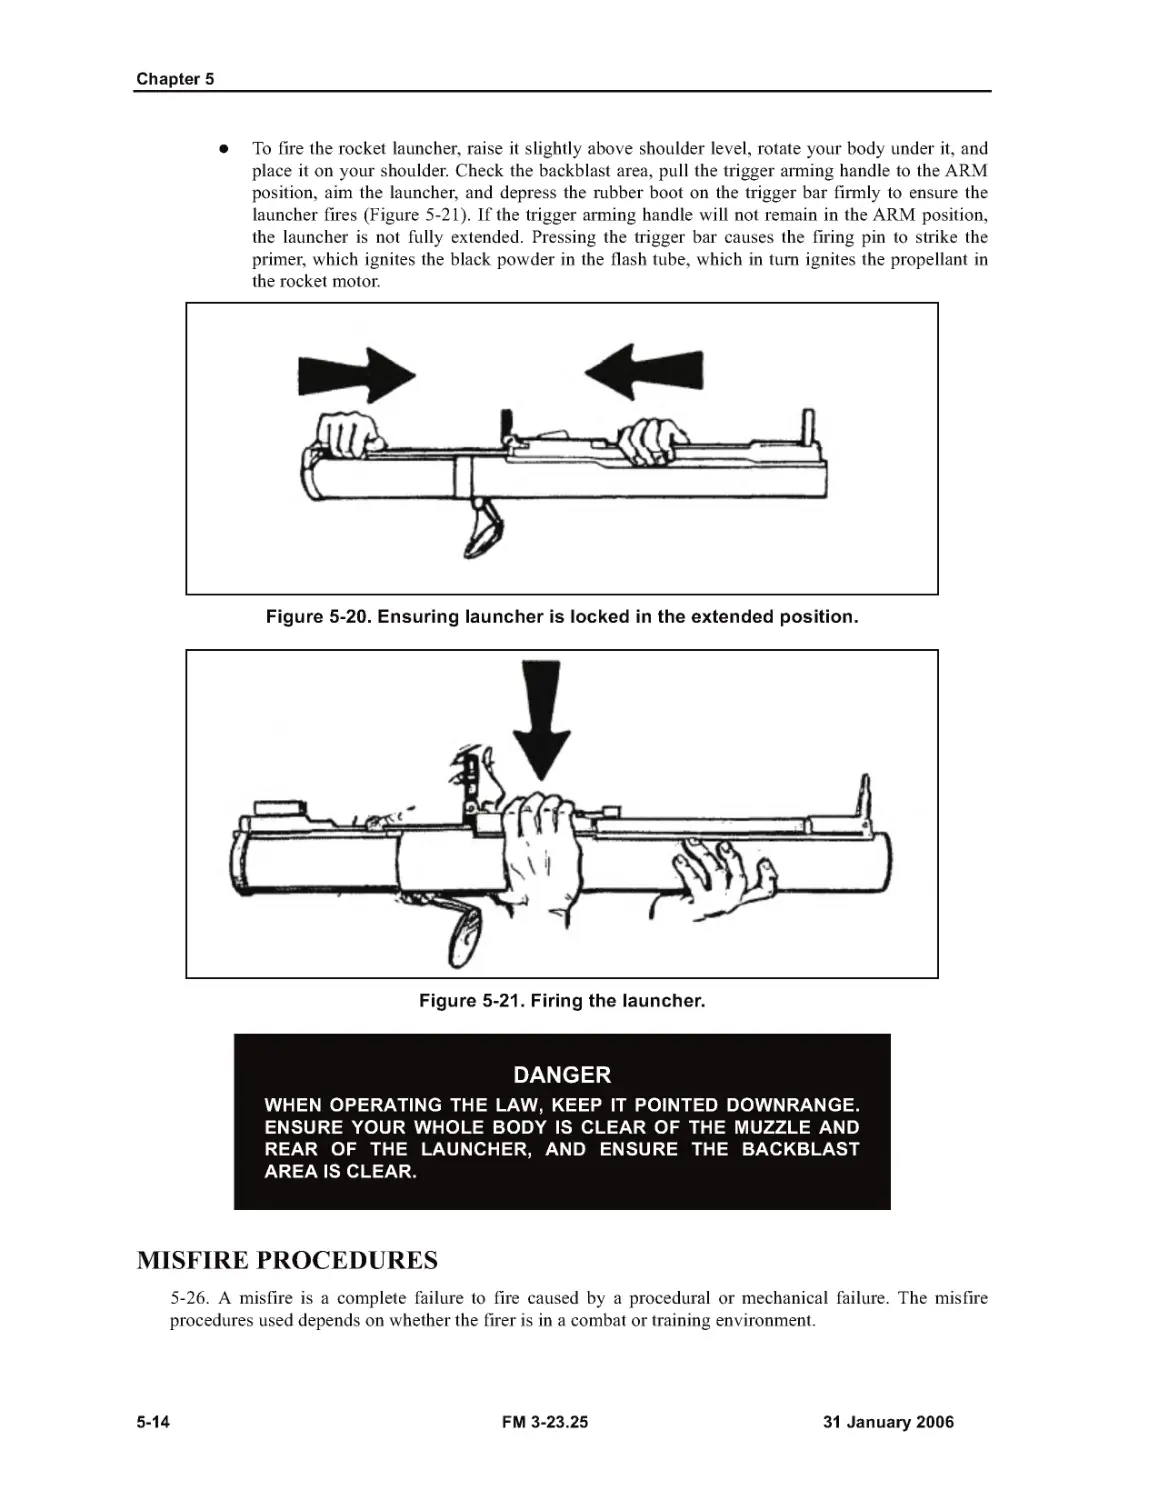 Figure 5-20. Ensuring launcher is locked in the extended position.
Figure 5-21. Firing the launcher.
MISFIRE PROCEDURES